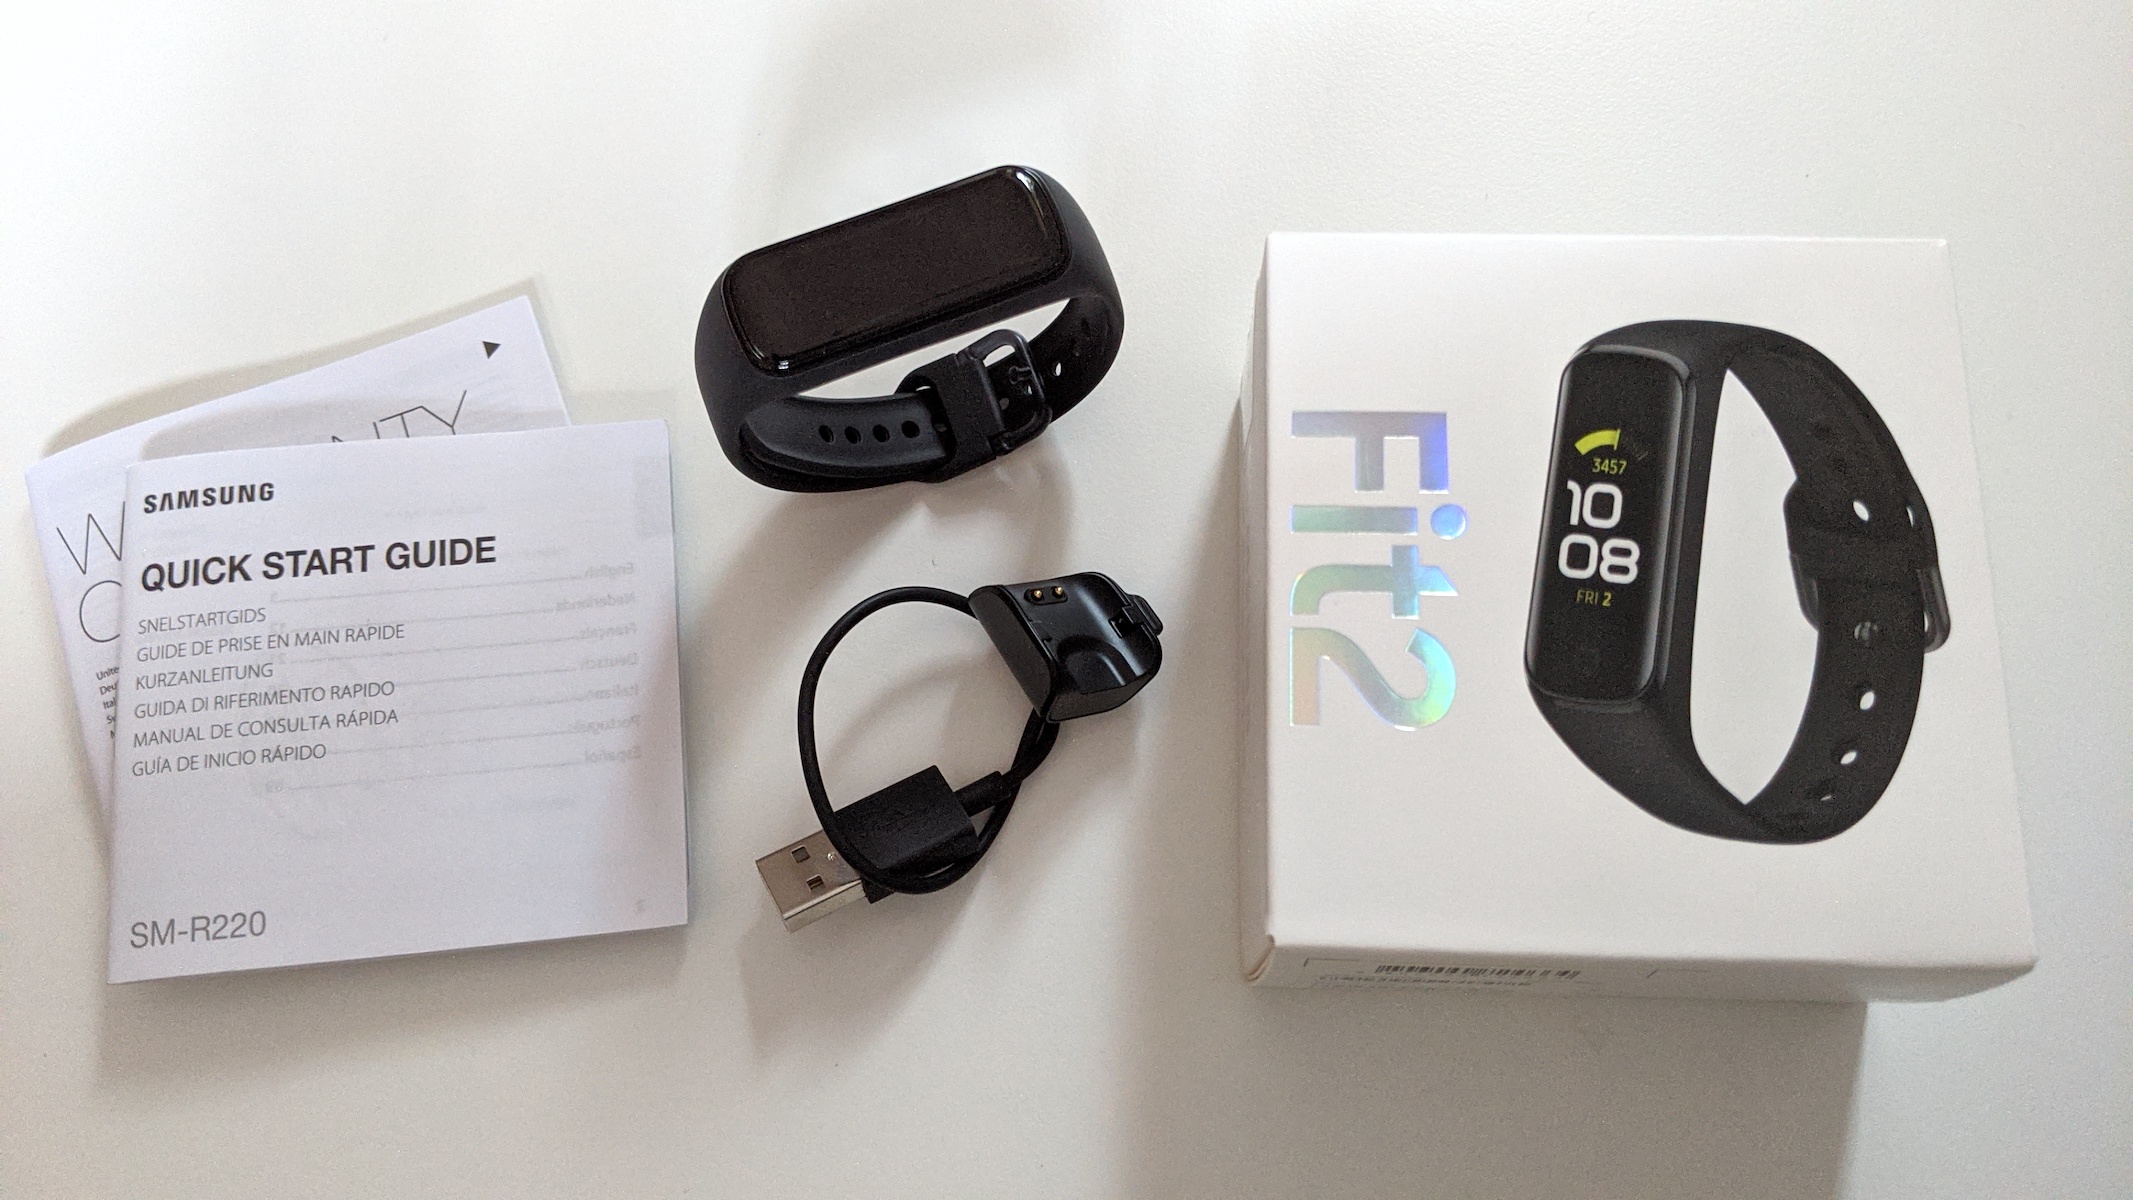 Samsung Galaxy Fit2 fitness tracker in the review: Better than its